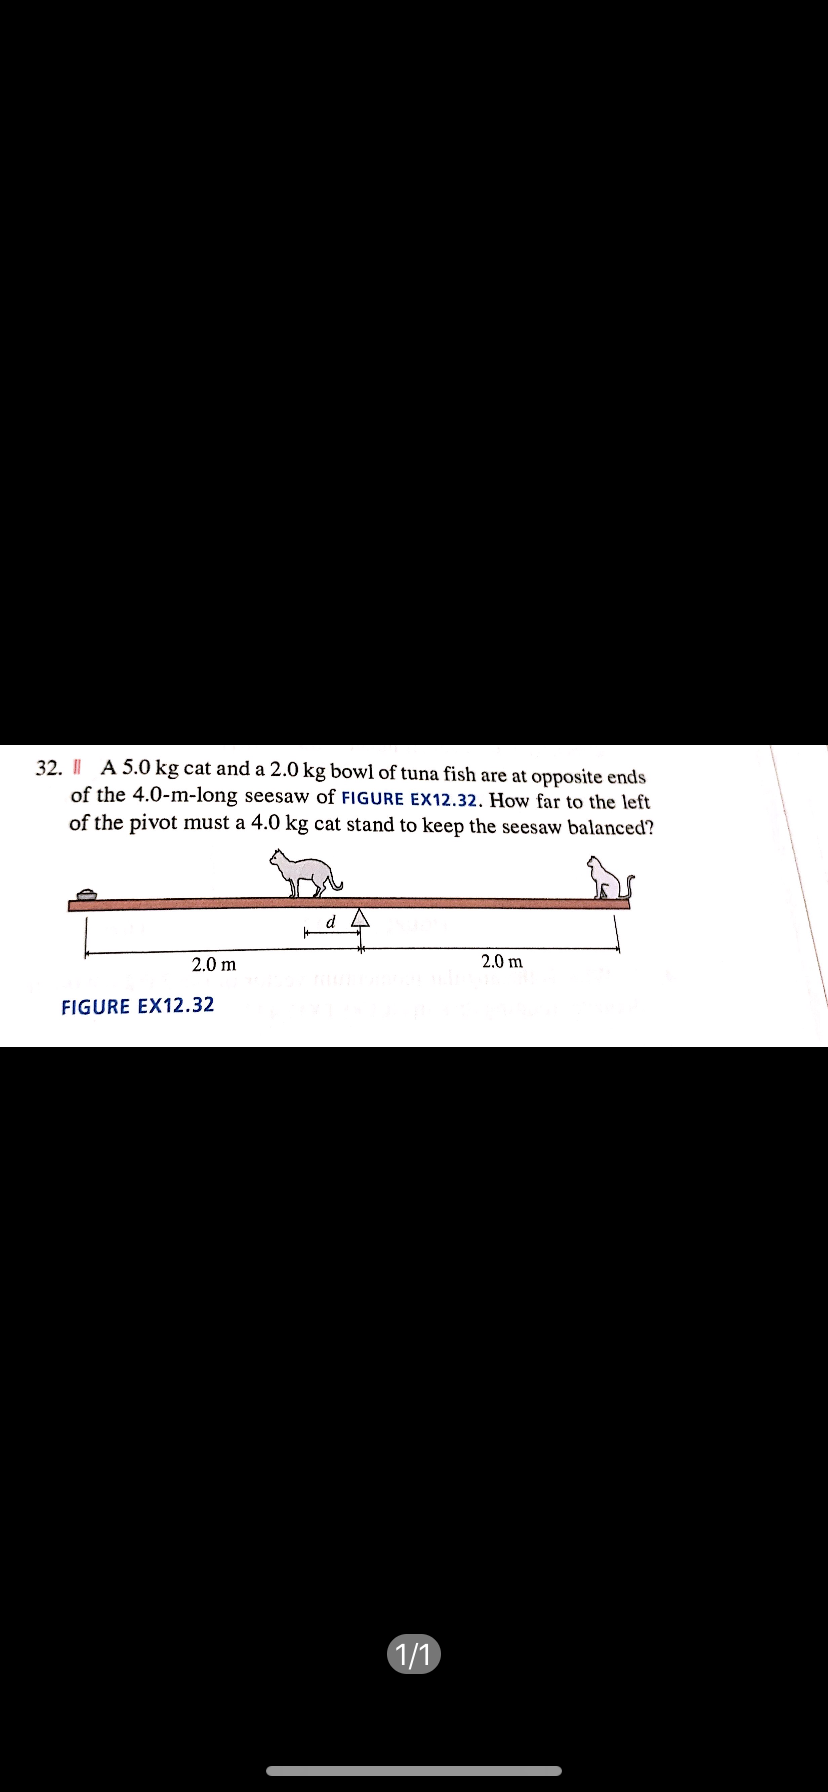 32. I| A 5.0 kg cat and a 2.0 kg bowl of tuna fish are at opposite ends
of the 4.0-m-long seesaw of FIGURE EX12.32. How far to the left
of the pivot must a 4.0 kg cat stand to keep the seesaw balanced?
2.0 m
2.0 m
FIGURE EX12.32
1/1
